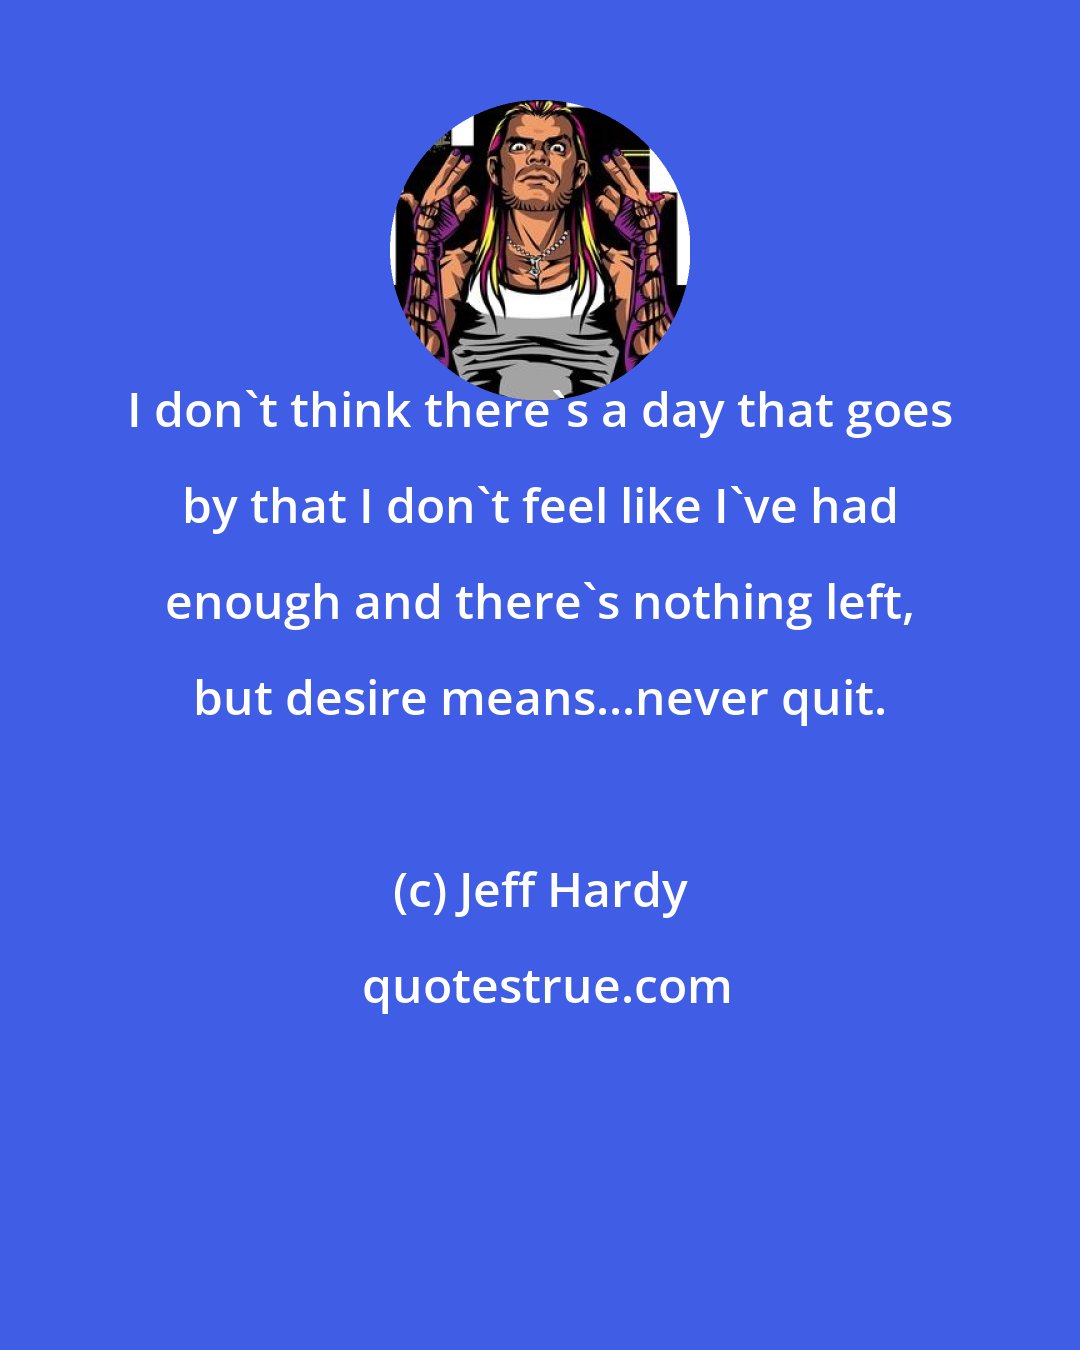 Jeff Hardy: I don't think there's a day that goes by that I don't feel like I've had enough and there's nothing left, but desire means...never quit.